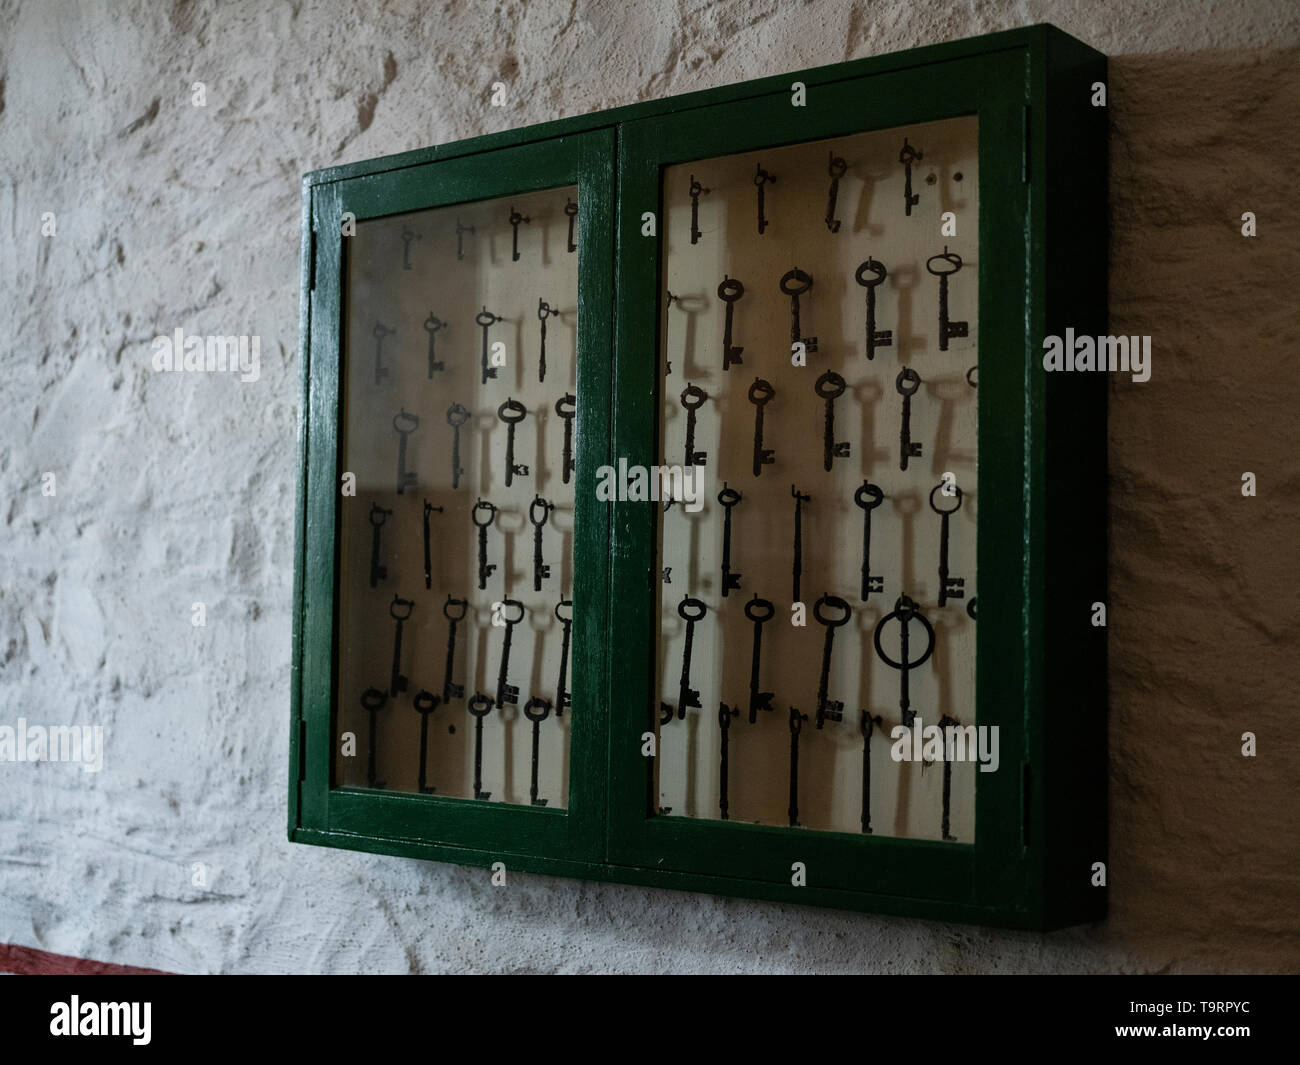 Keys in a glass display cabinet. Stock Photo